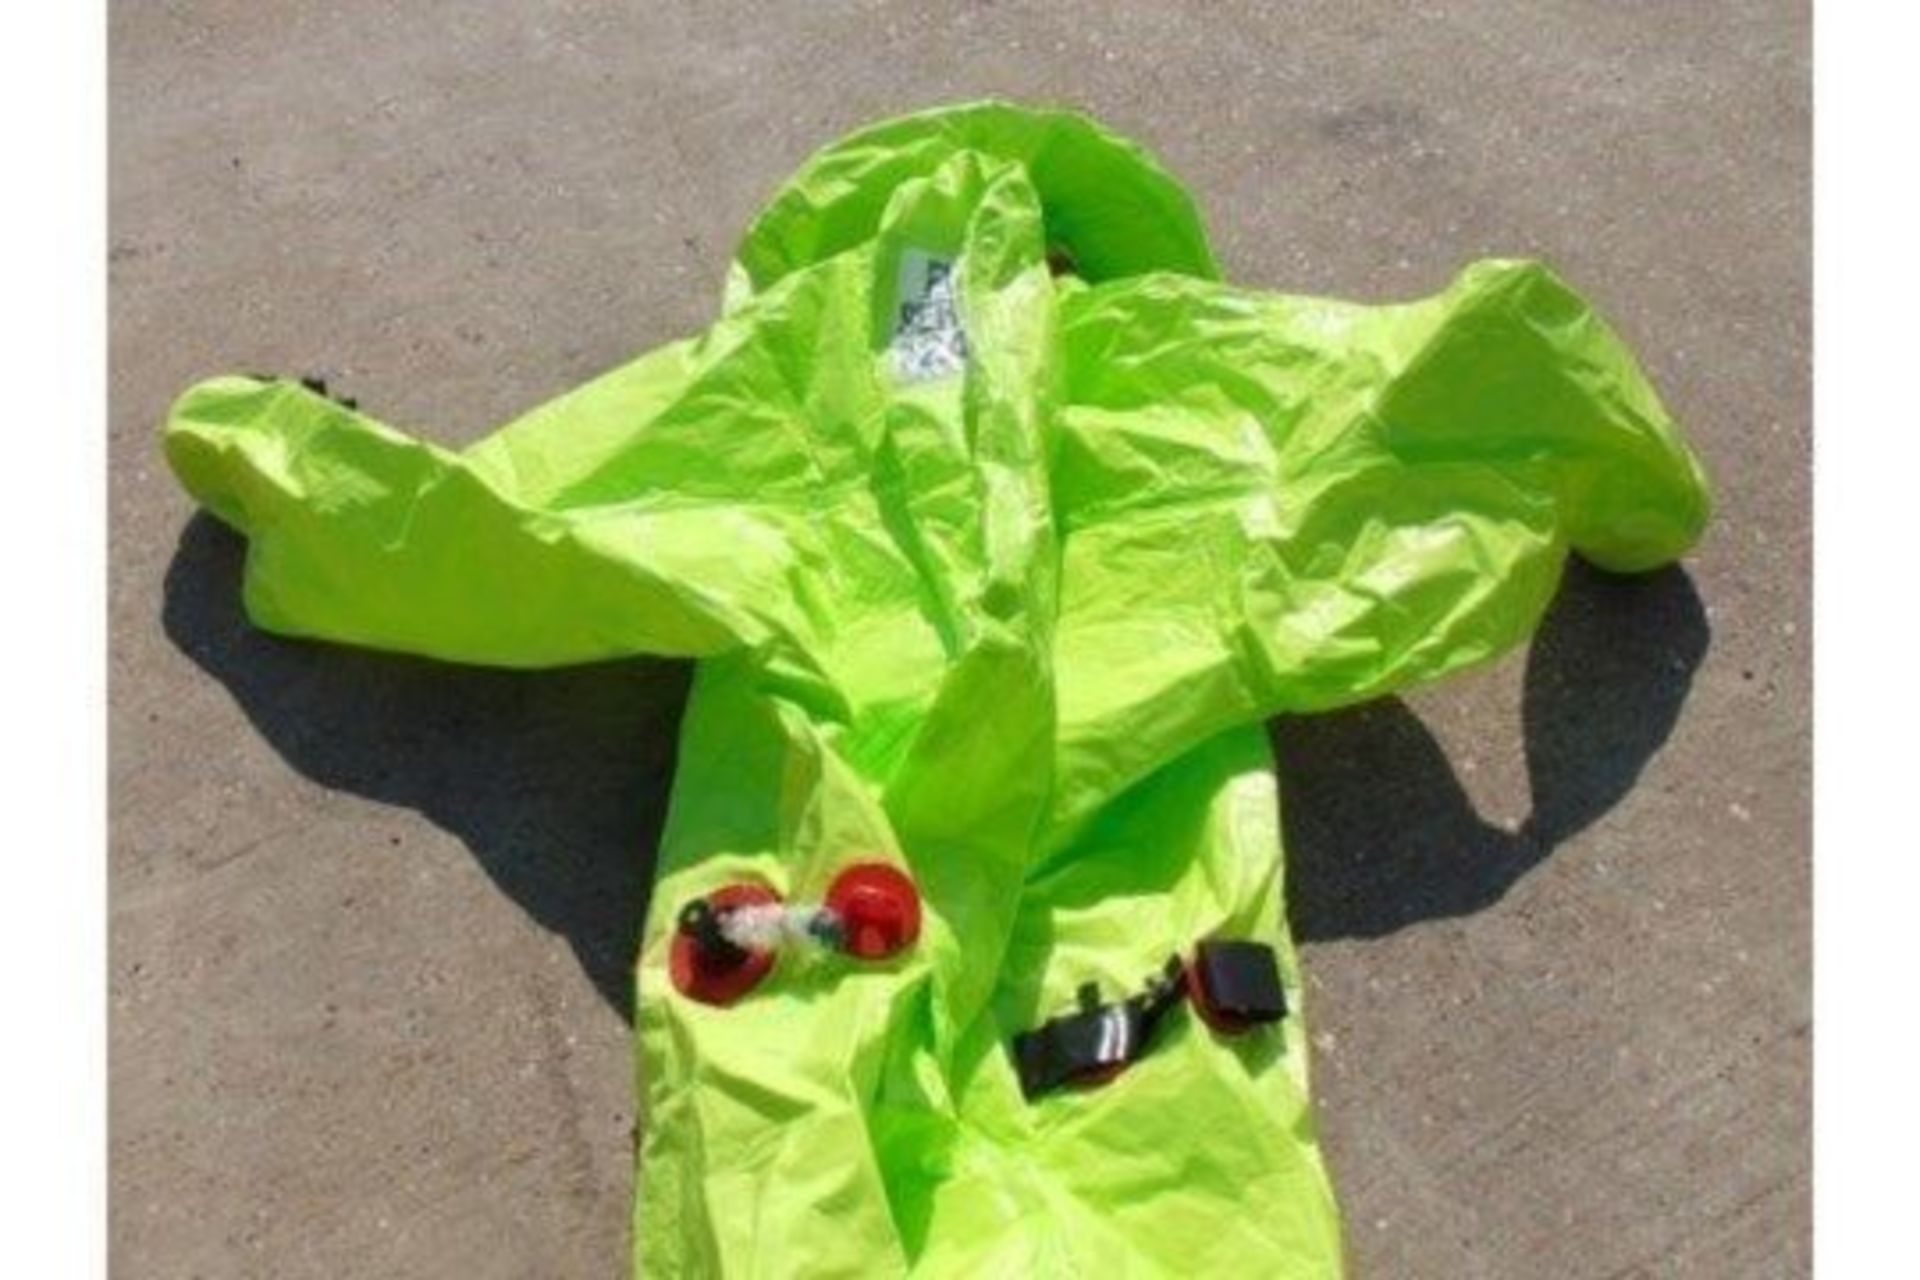 10 x Respirex Tychem TK Gas-Tight Hazmat Suit Type 1A with Attached Boots and Gloves. - Image 3 of 10